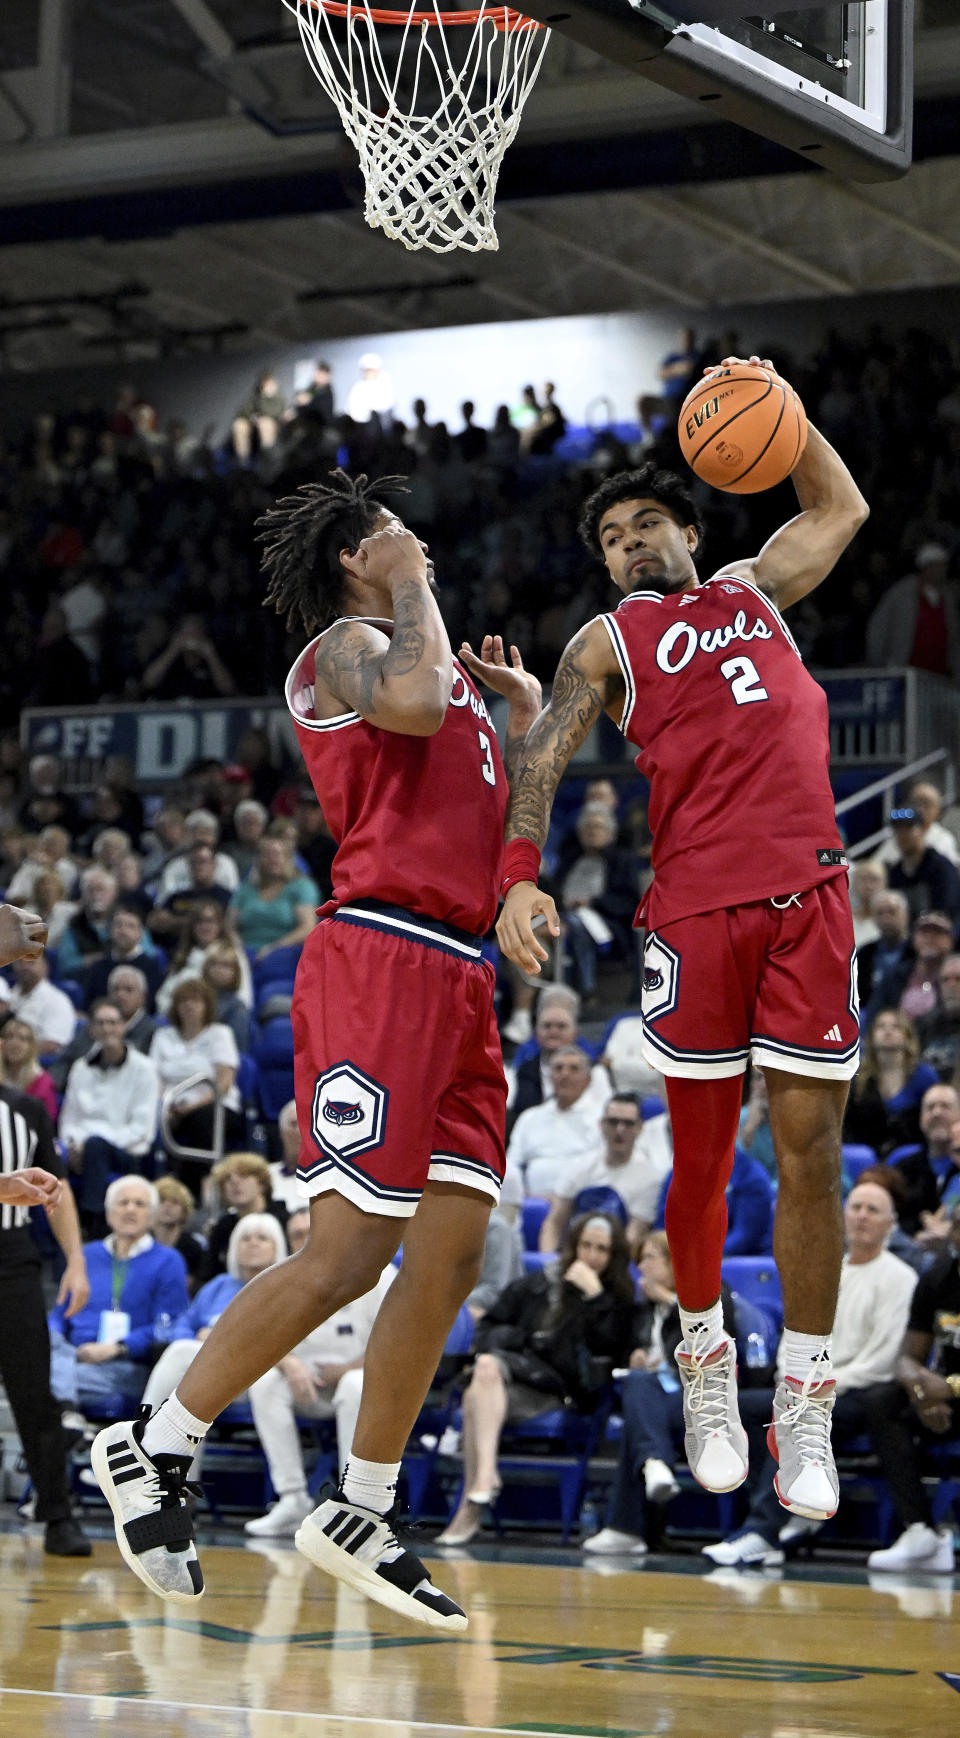 Florida Atlantic's Nick Boyd (2) comes down with with a rebound against Florida Gulf Coast in the first half of an NCAA college basketball game, Saturday, Dec. 30, 2023, in Fort Myers, Fla. (AP Photo/Chris Tilley)